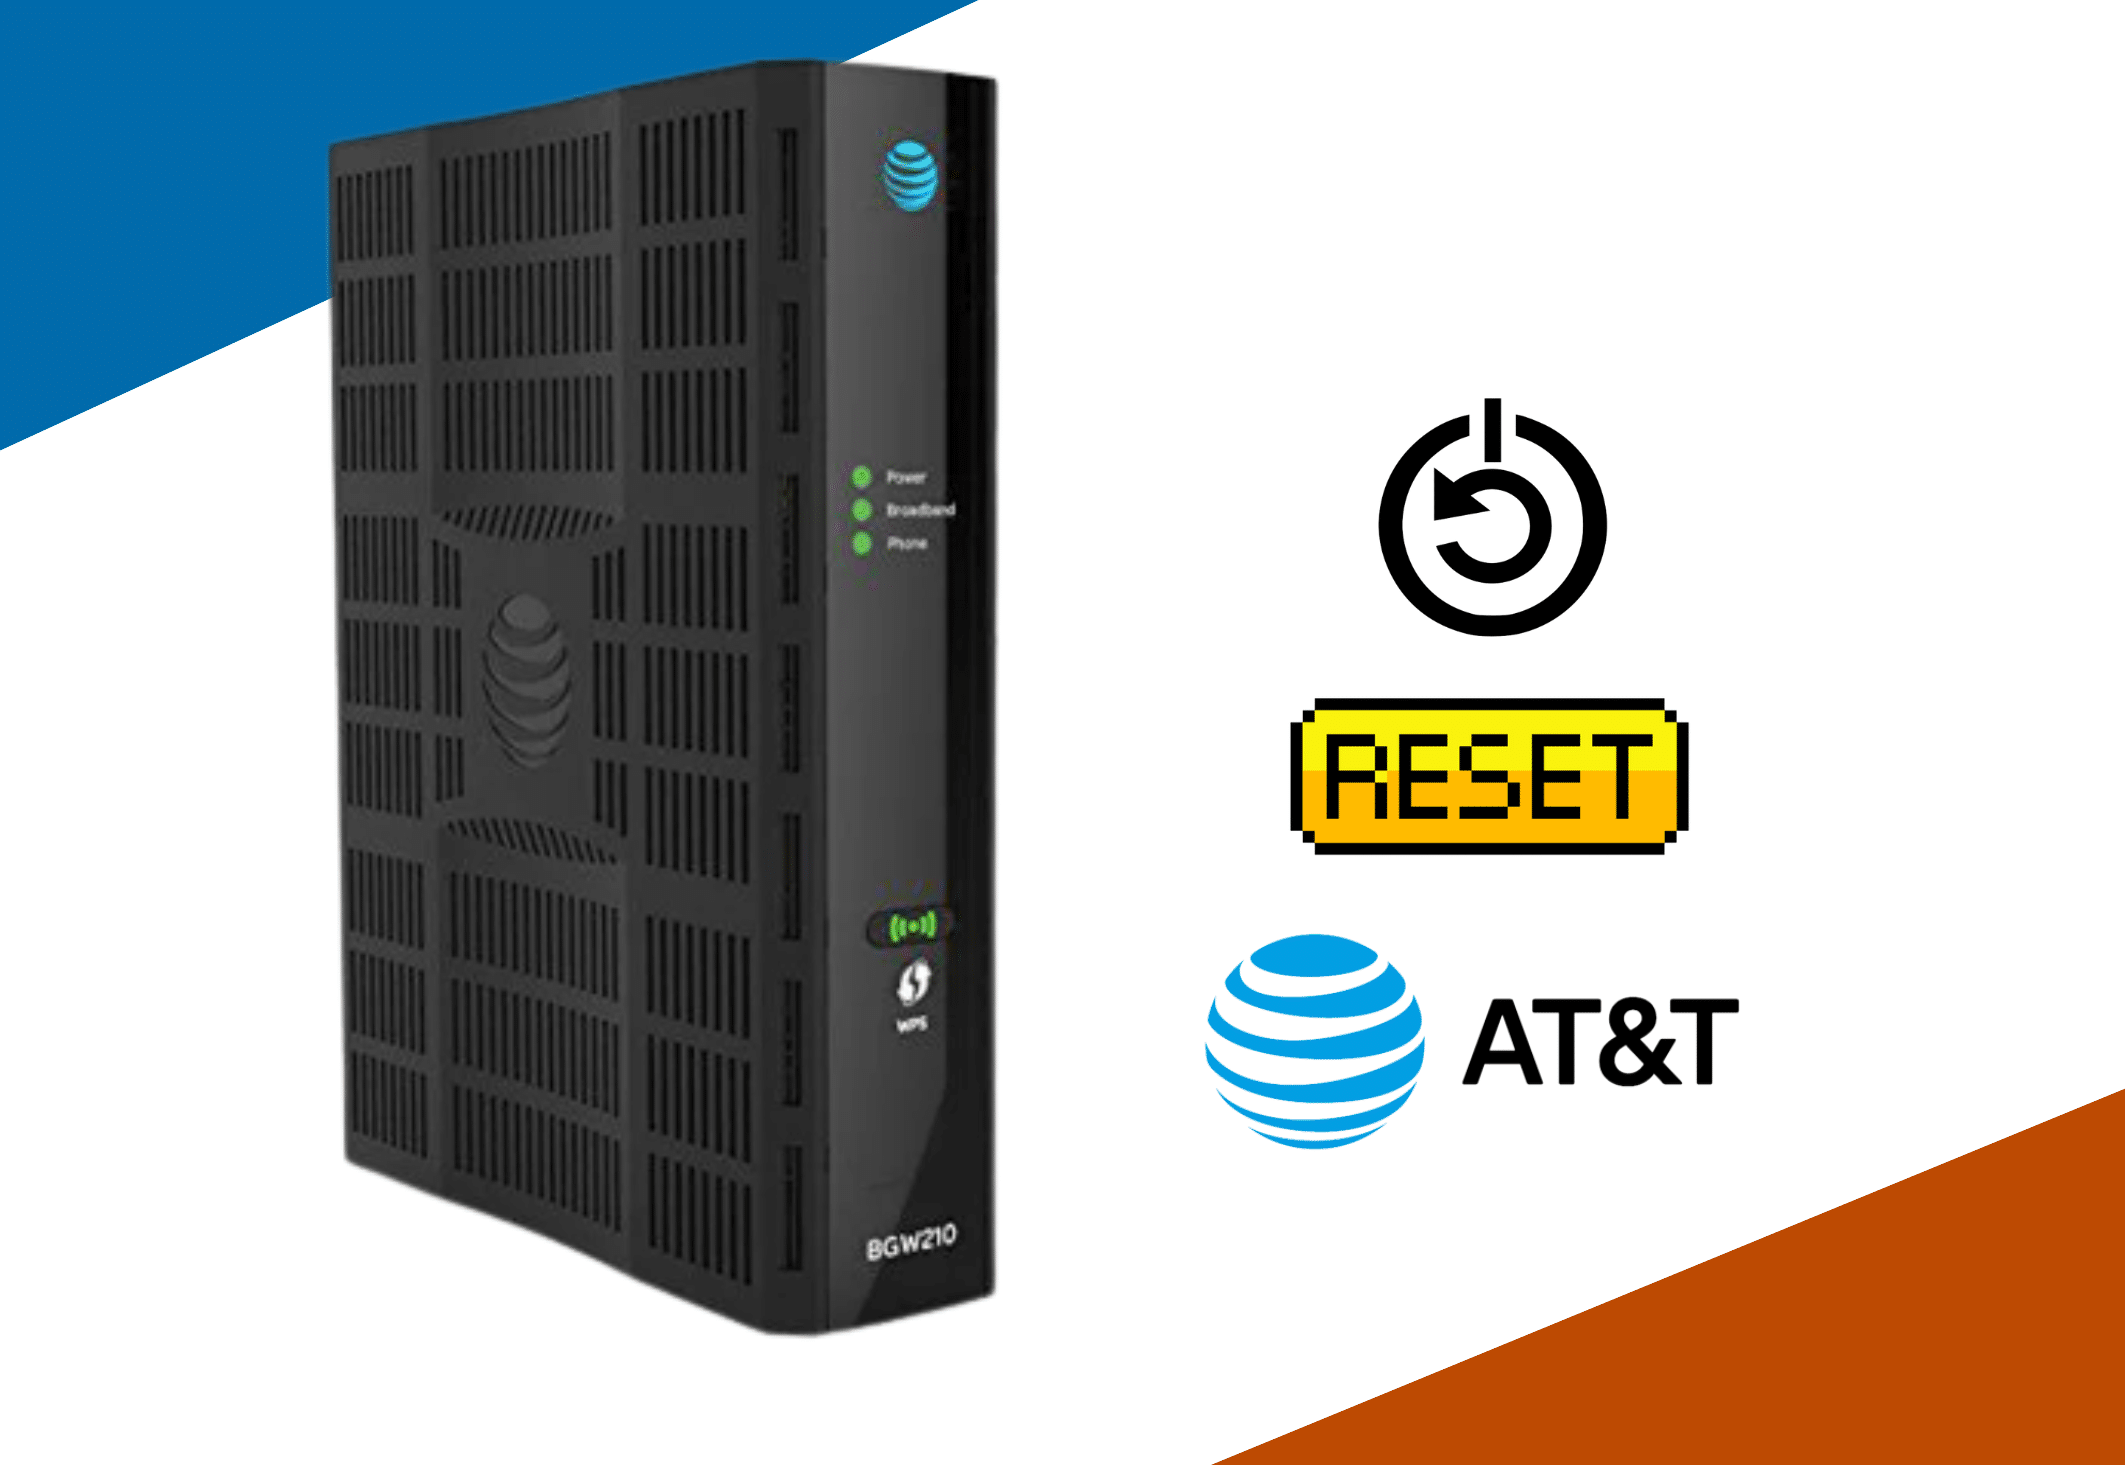 Quick and Easy Guide on How to Reset AT&T Router or Modem